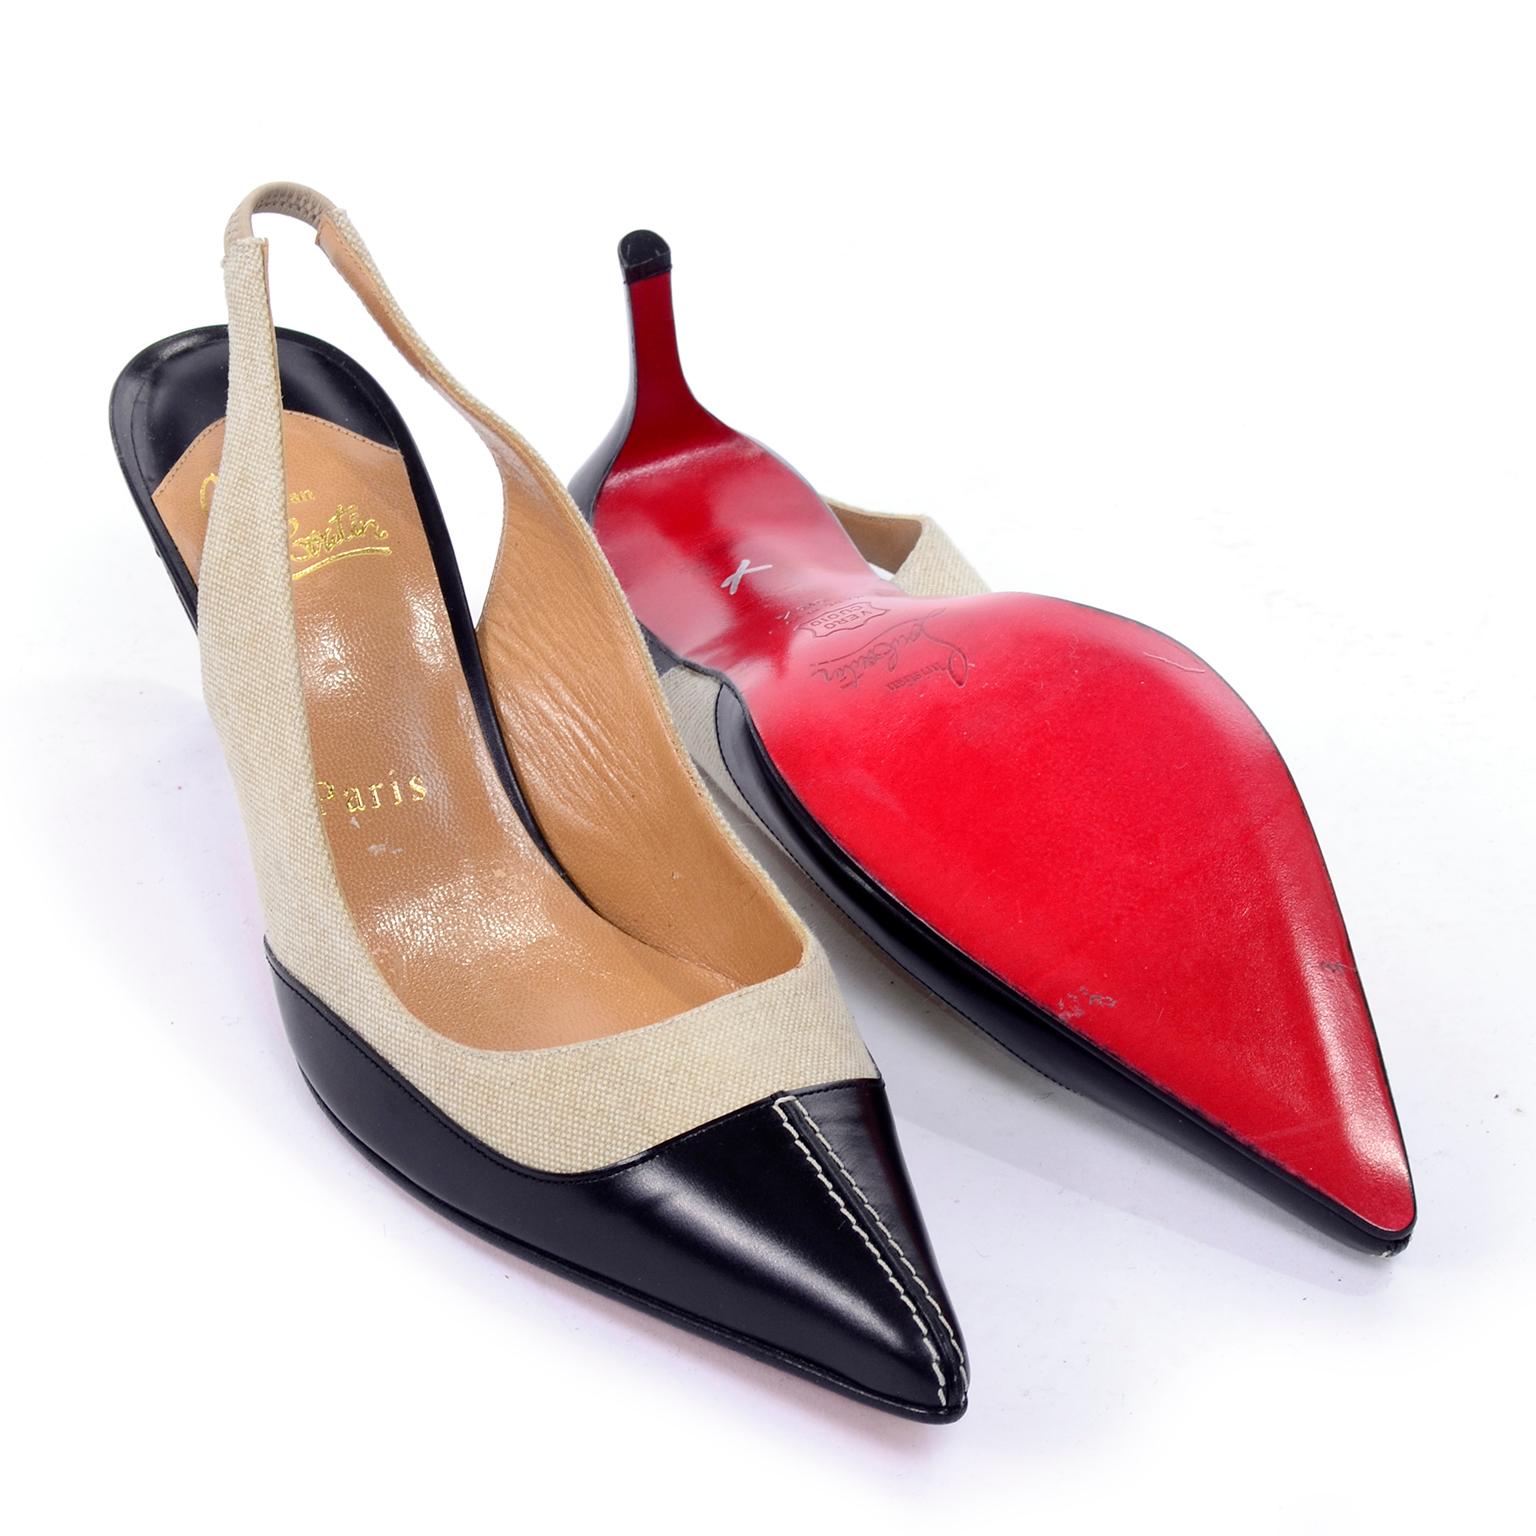 Beige Christian Louboutin Shoes Slingback Heels in Two Tone Black & Natural Size 38.5